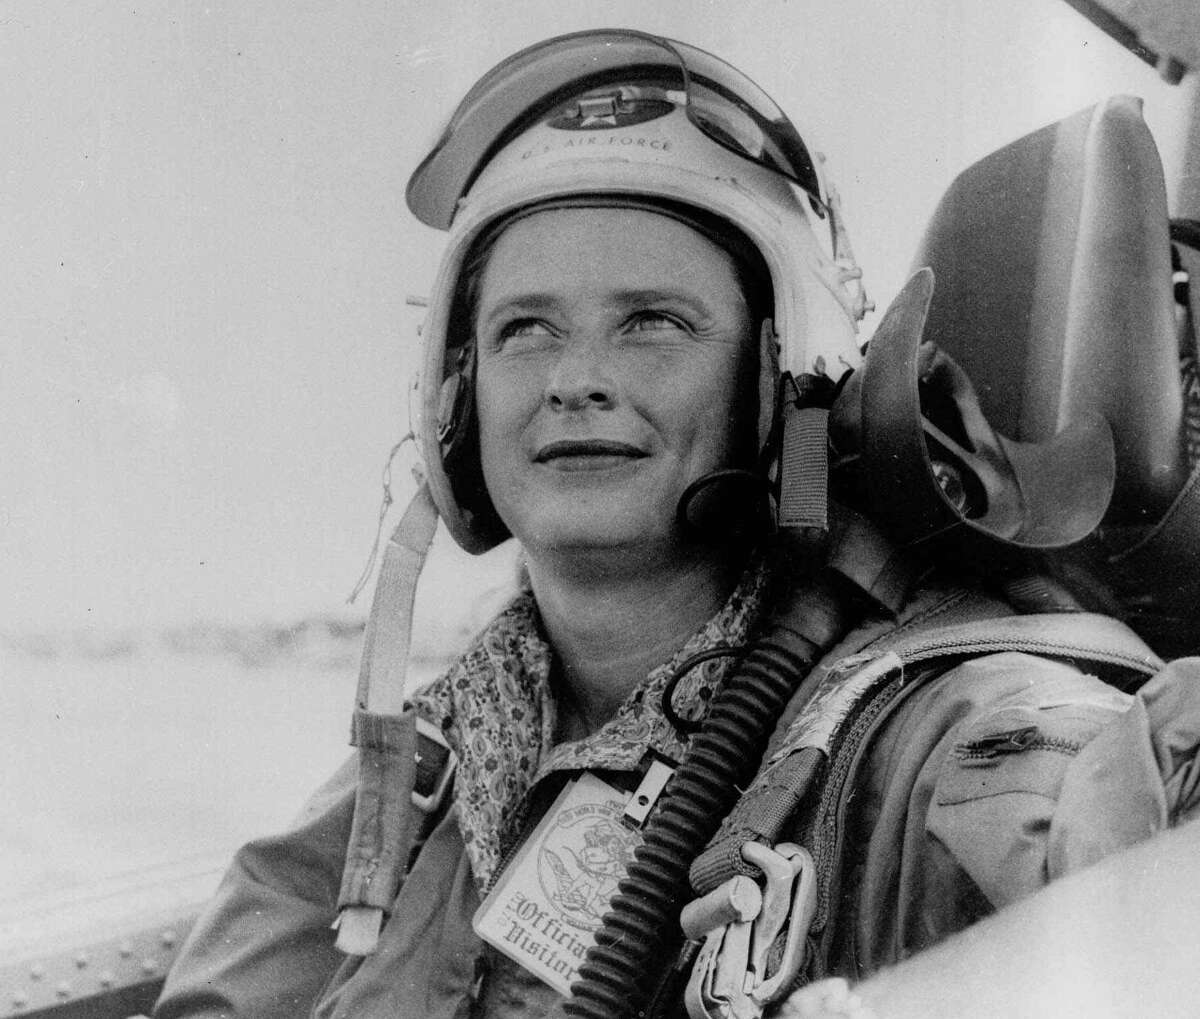 This 1961 file photo shows astronaut candidate Jerrie Cobb in the cockpit of a military aircraft. Cobb was never given the chance to go into space, as NASA wanted only jet test pilots — and that meant only men. Cobb was a record-setting pilot with more than 10,000 hours logged in aircraft. She was one of the Mercury 13 - thirteen women tested to be astronauts until NASA shut down the program in the 1960s.